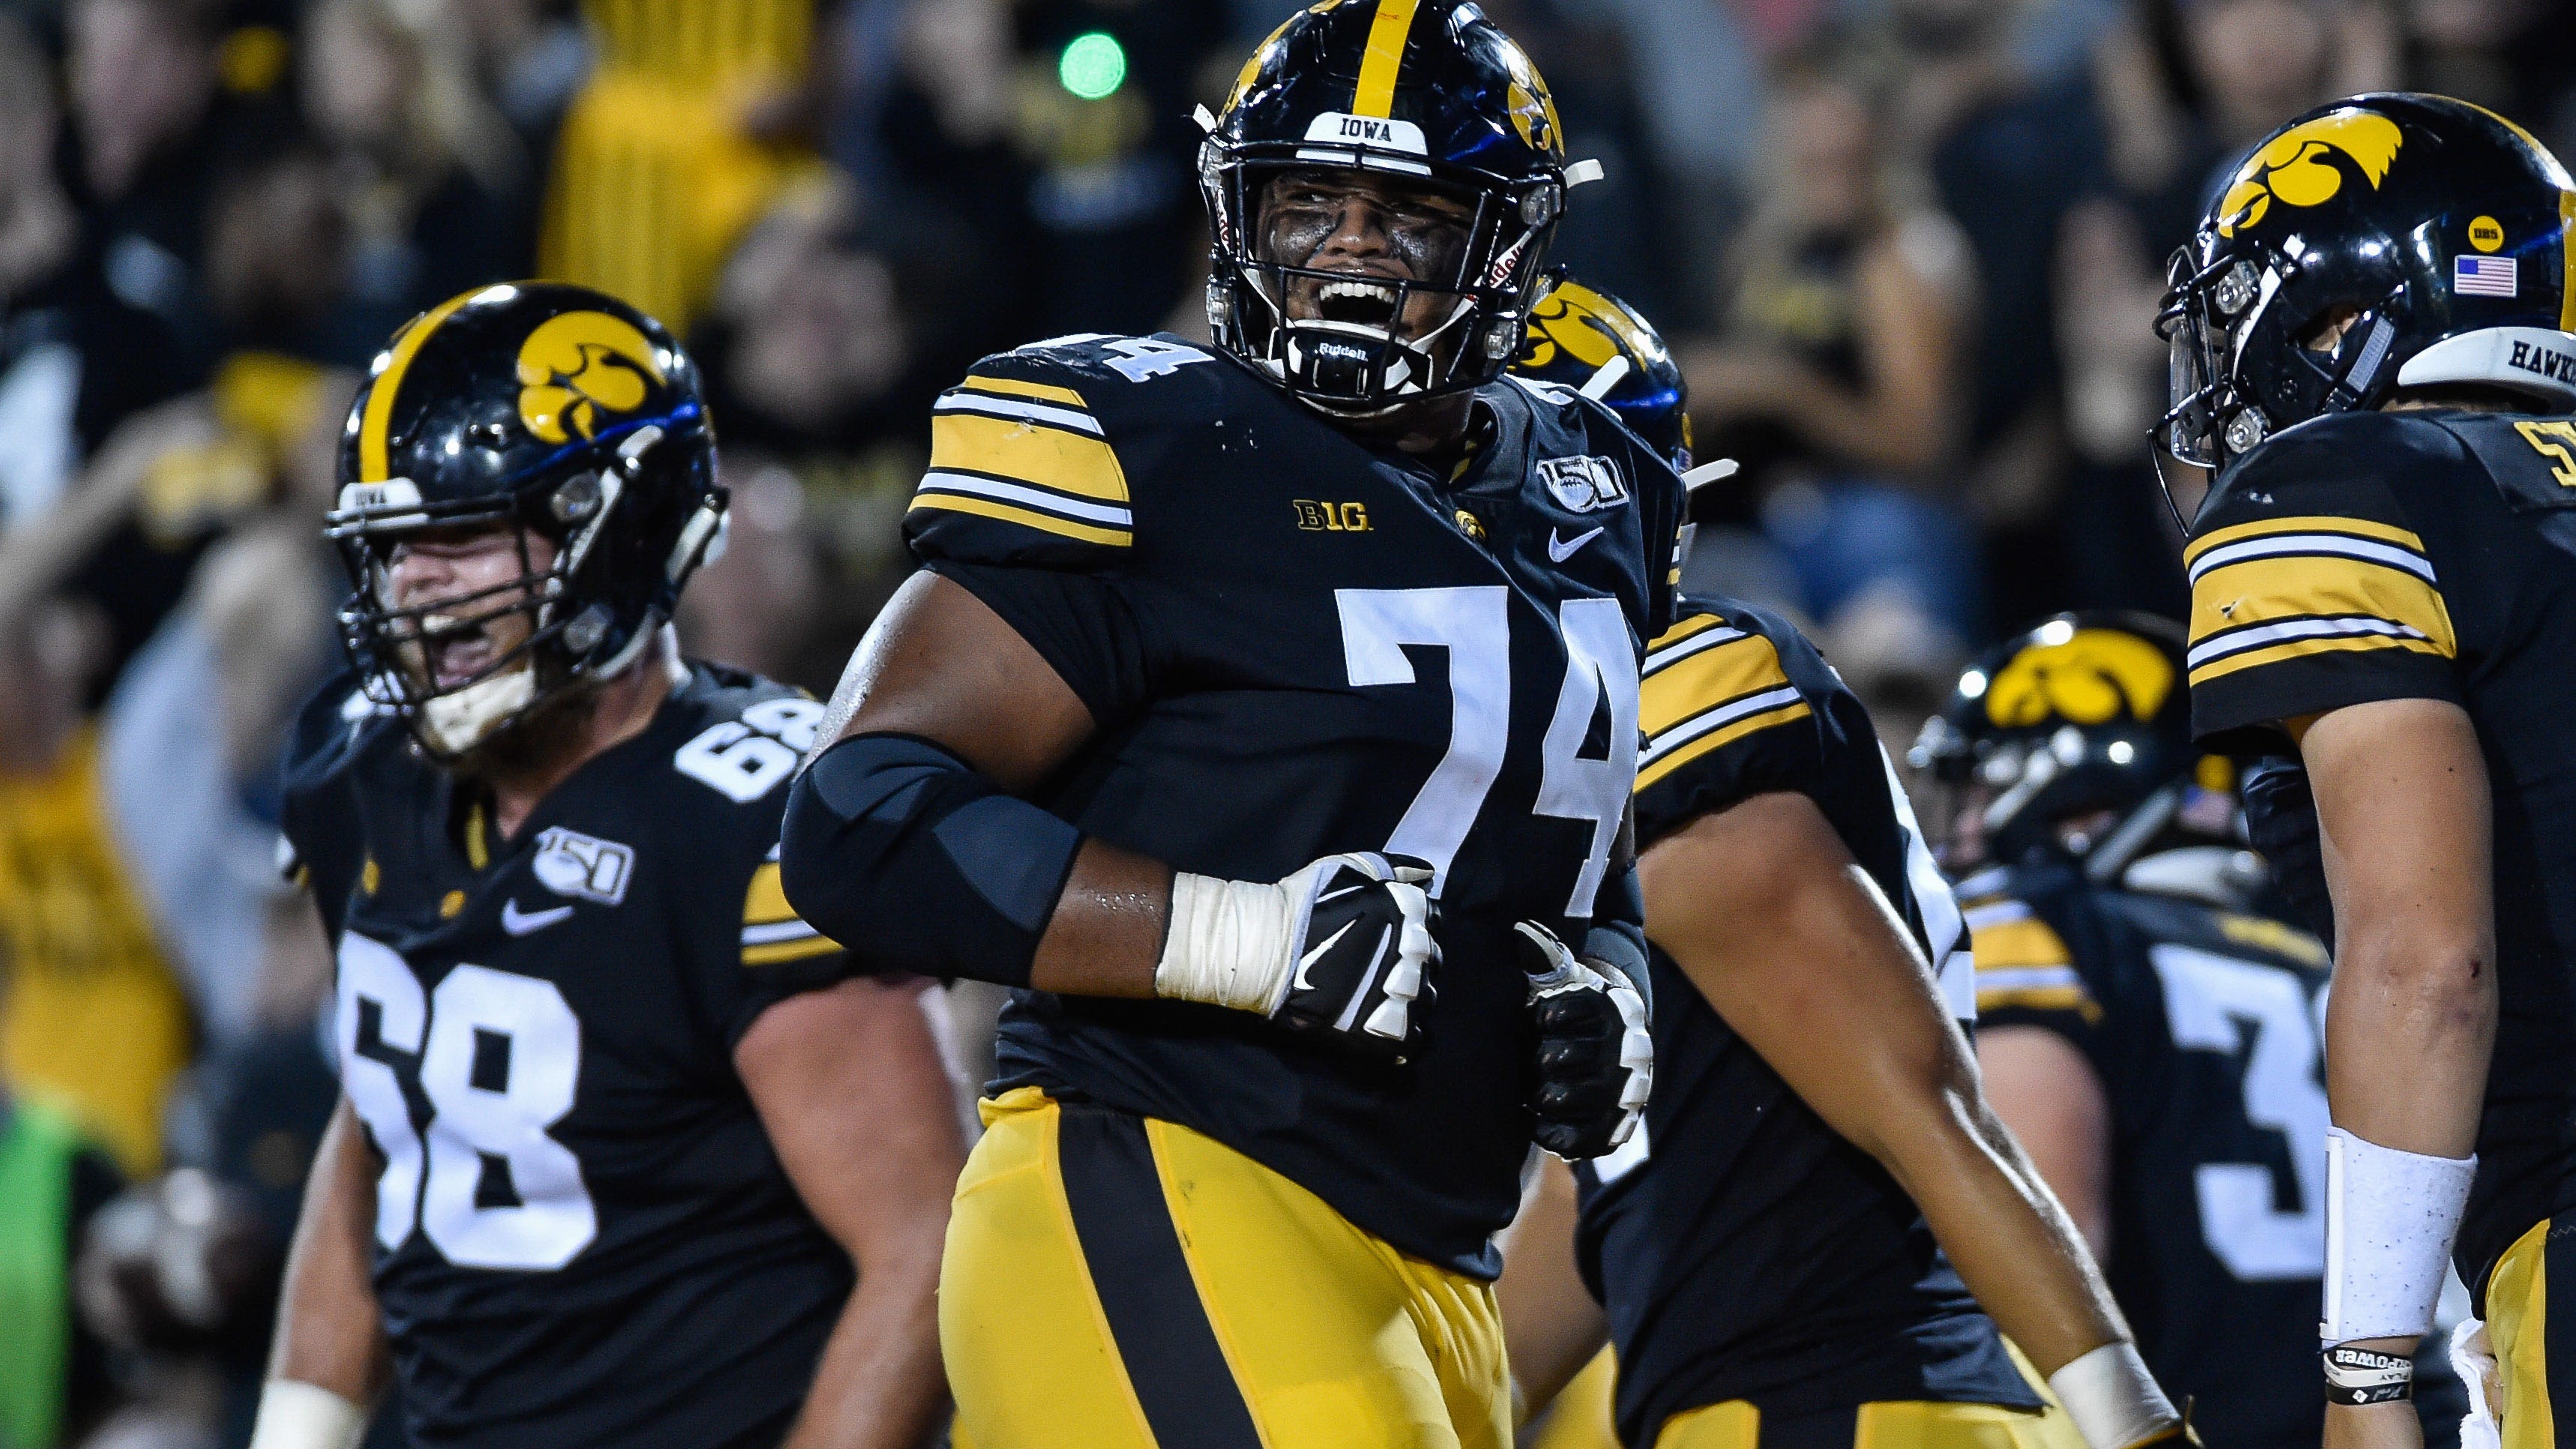 Aug 31, 2019; Iowa City, IA, USA; Iowa Hawkeyes offensive lineman Tristan Wirfs (74) reacts during the game against the Miami (Oh) Redhawks at Kinnick Stadium. Mandatory Credit: Jeffrey Becker-USA TODAY Sports